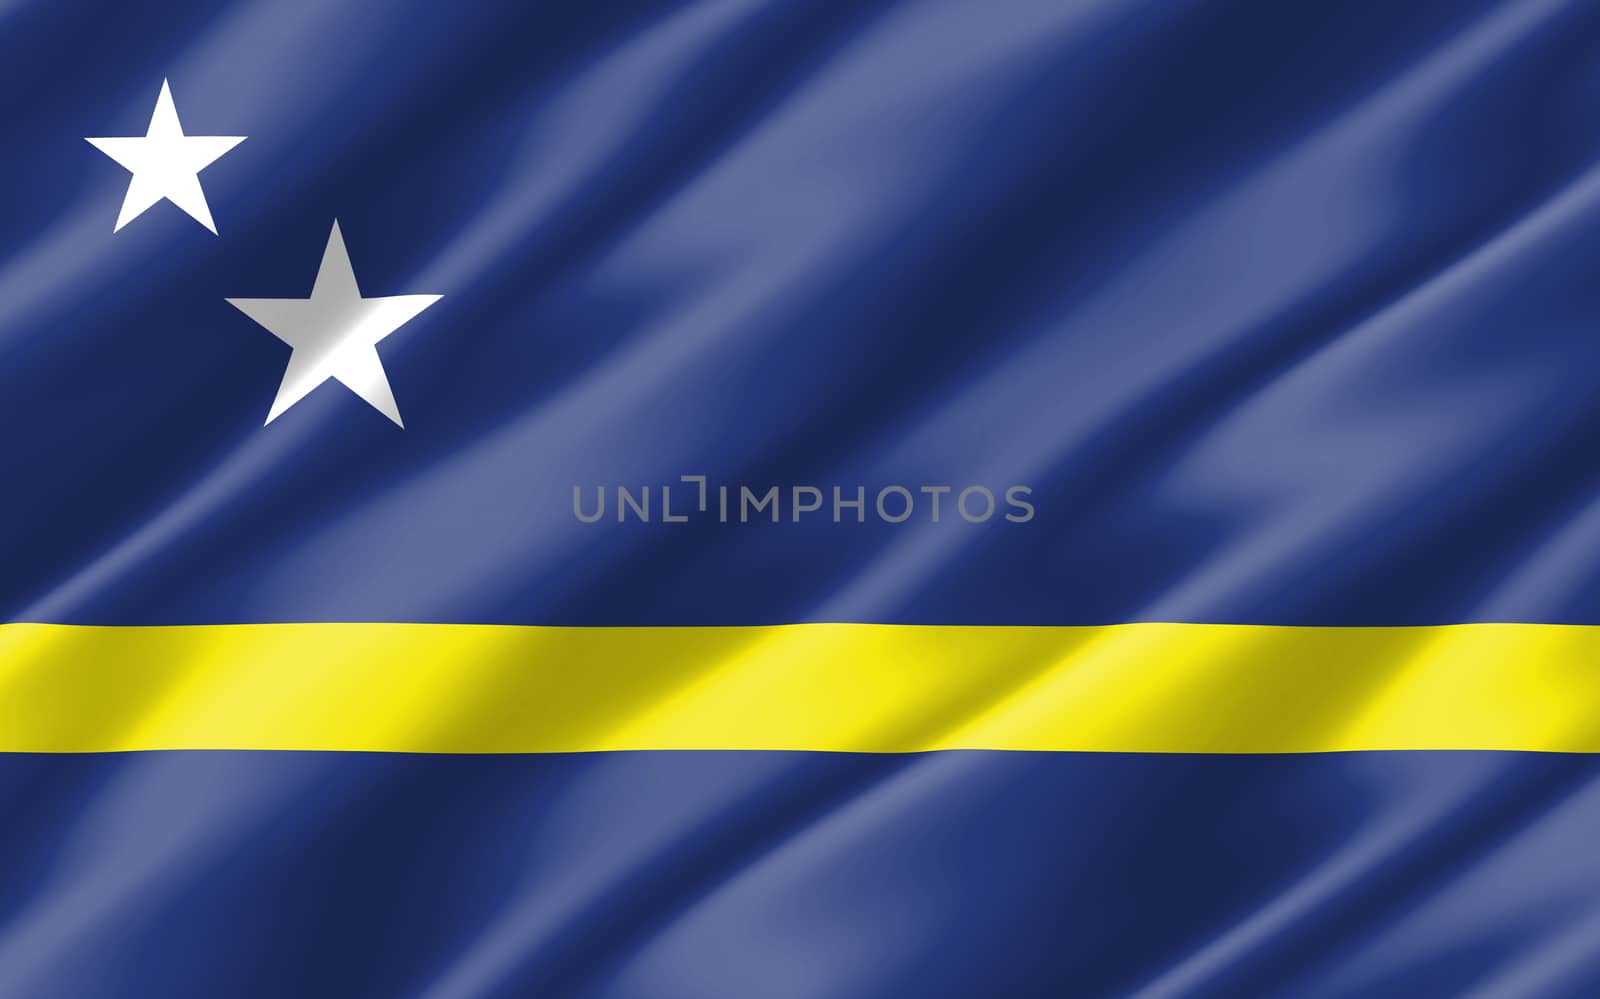 Silk wavy flag of Curacao graphic. Wavy Curacaoan flag illustration. Rippled Curacao country flag is a symbol of freedom, patriotism and independence.